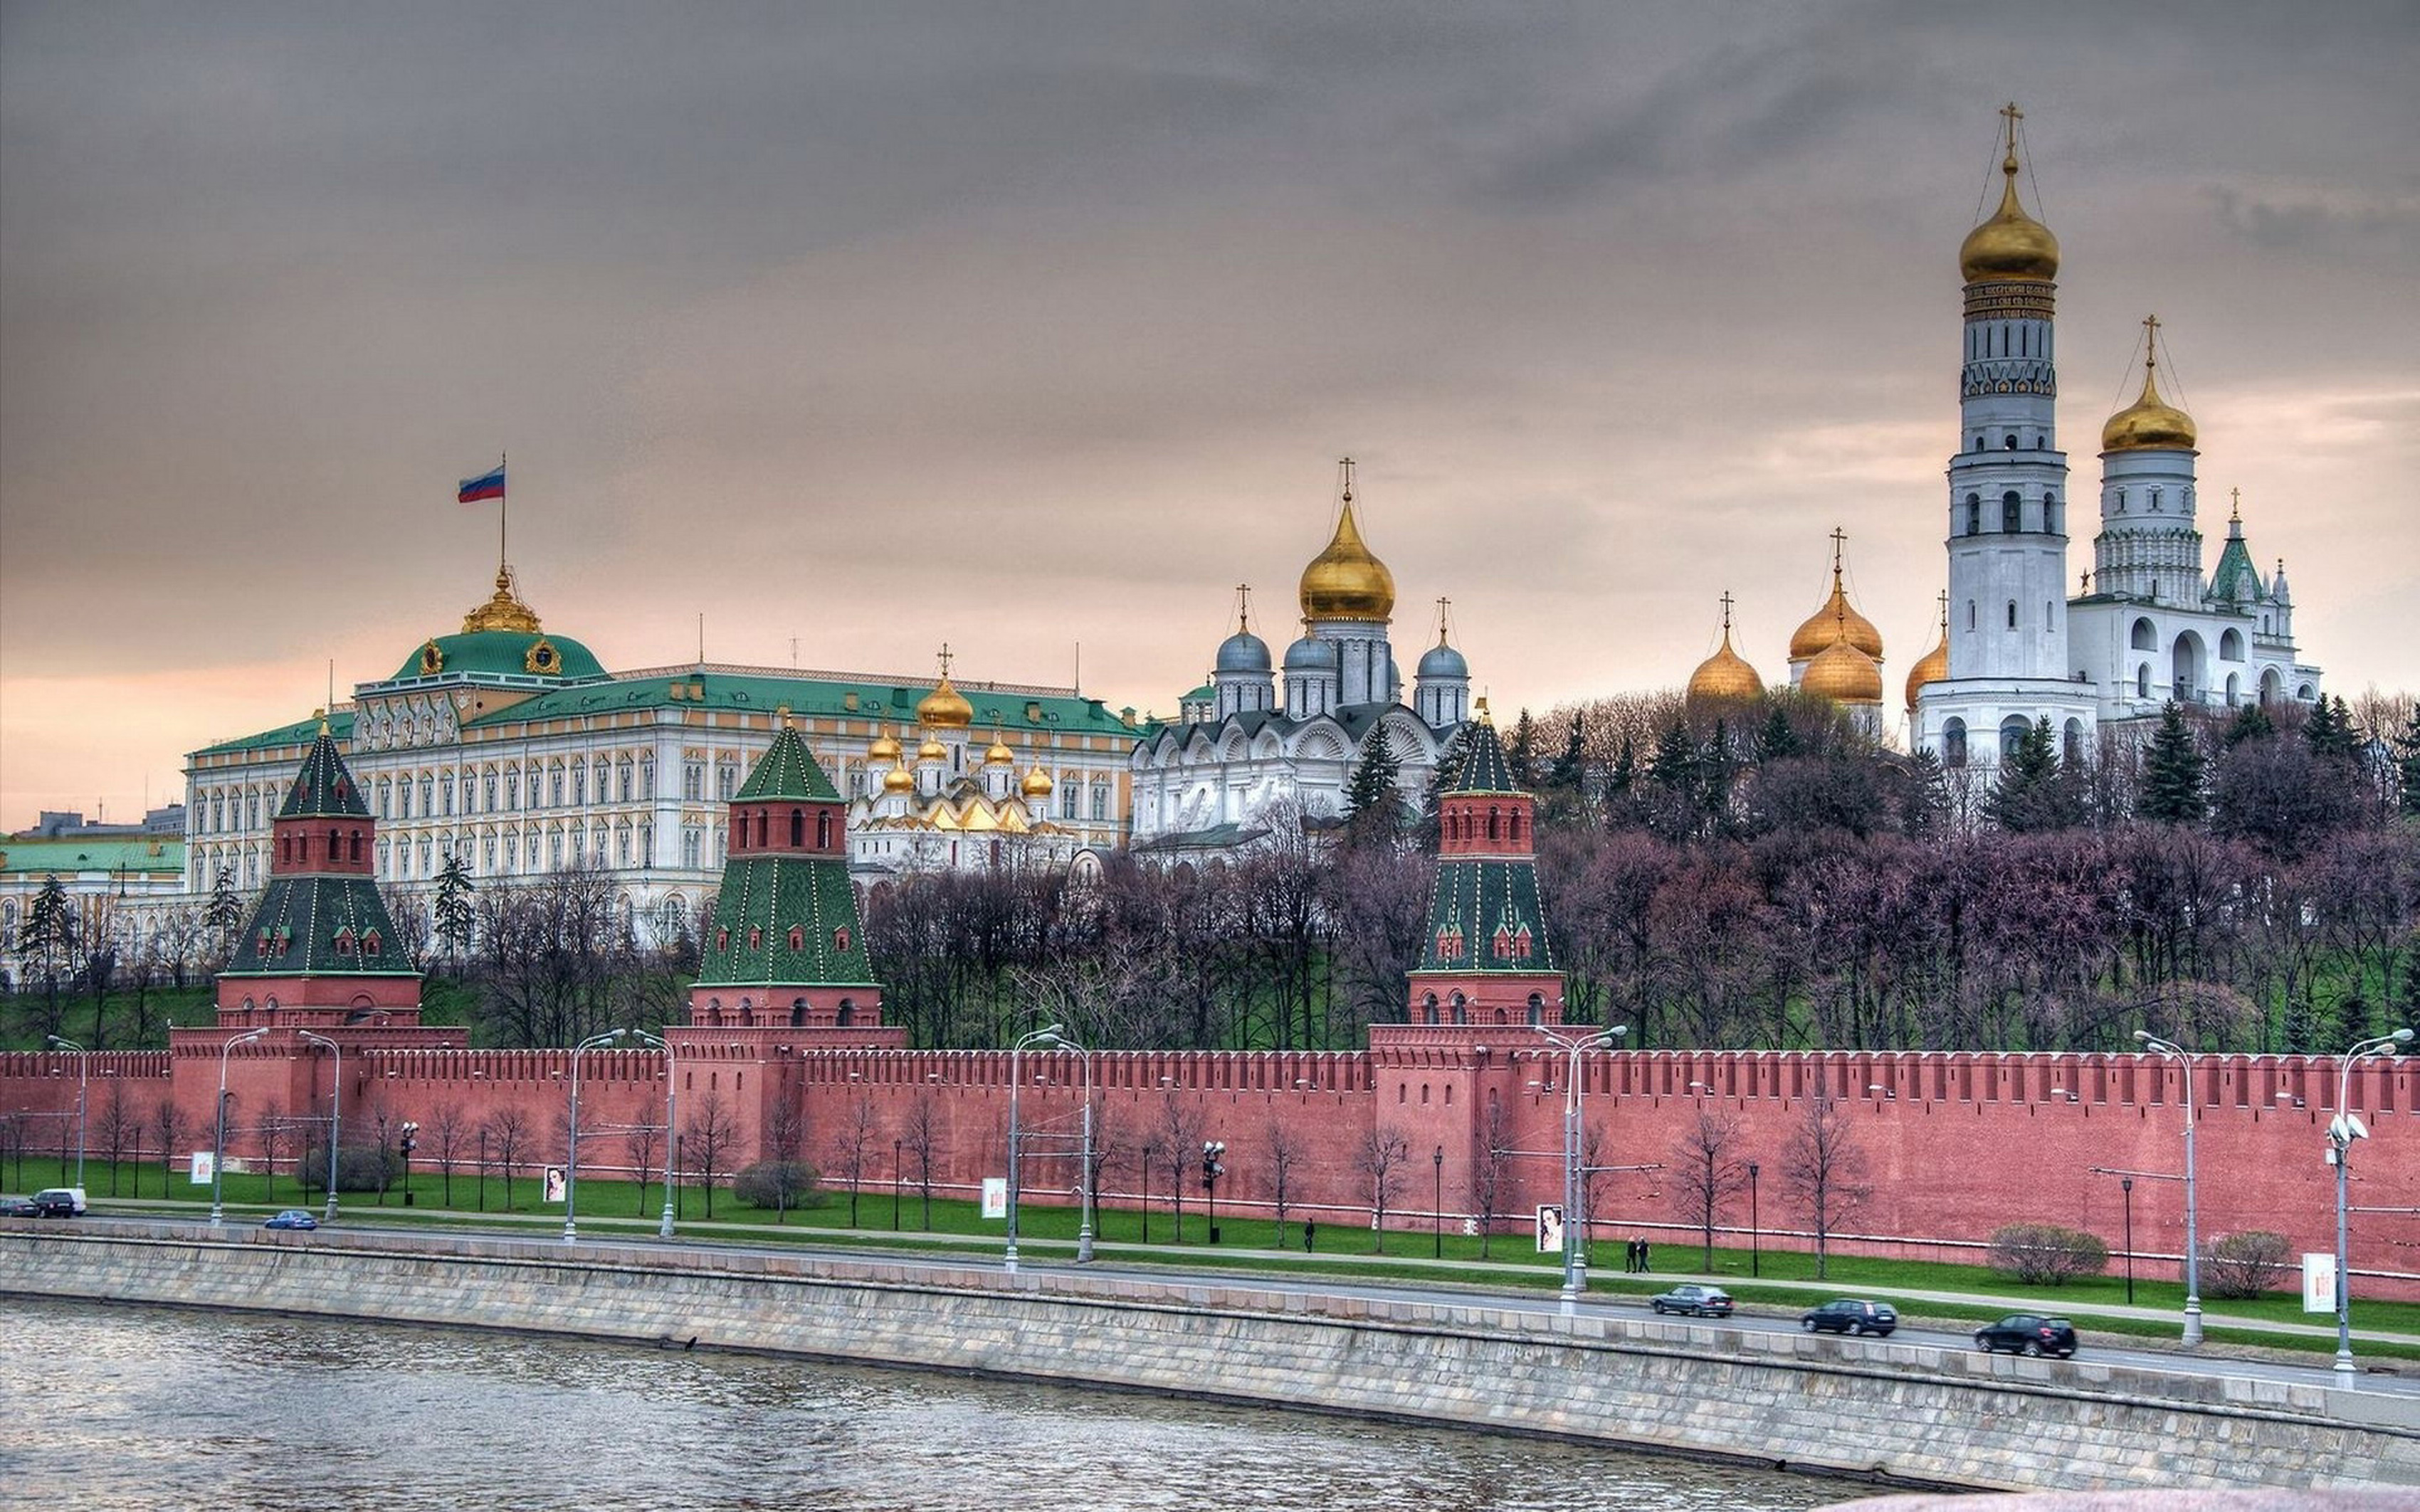 Moscow The Kremlin Wall And The Red Square Wallpaper Hd : Wallpapers13.com